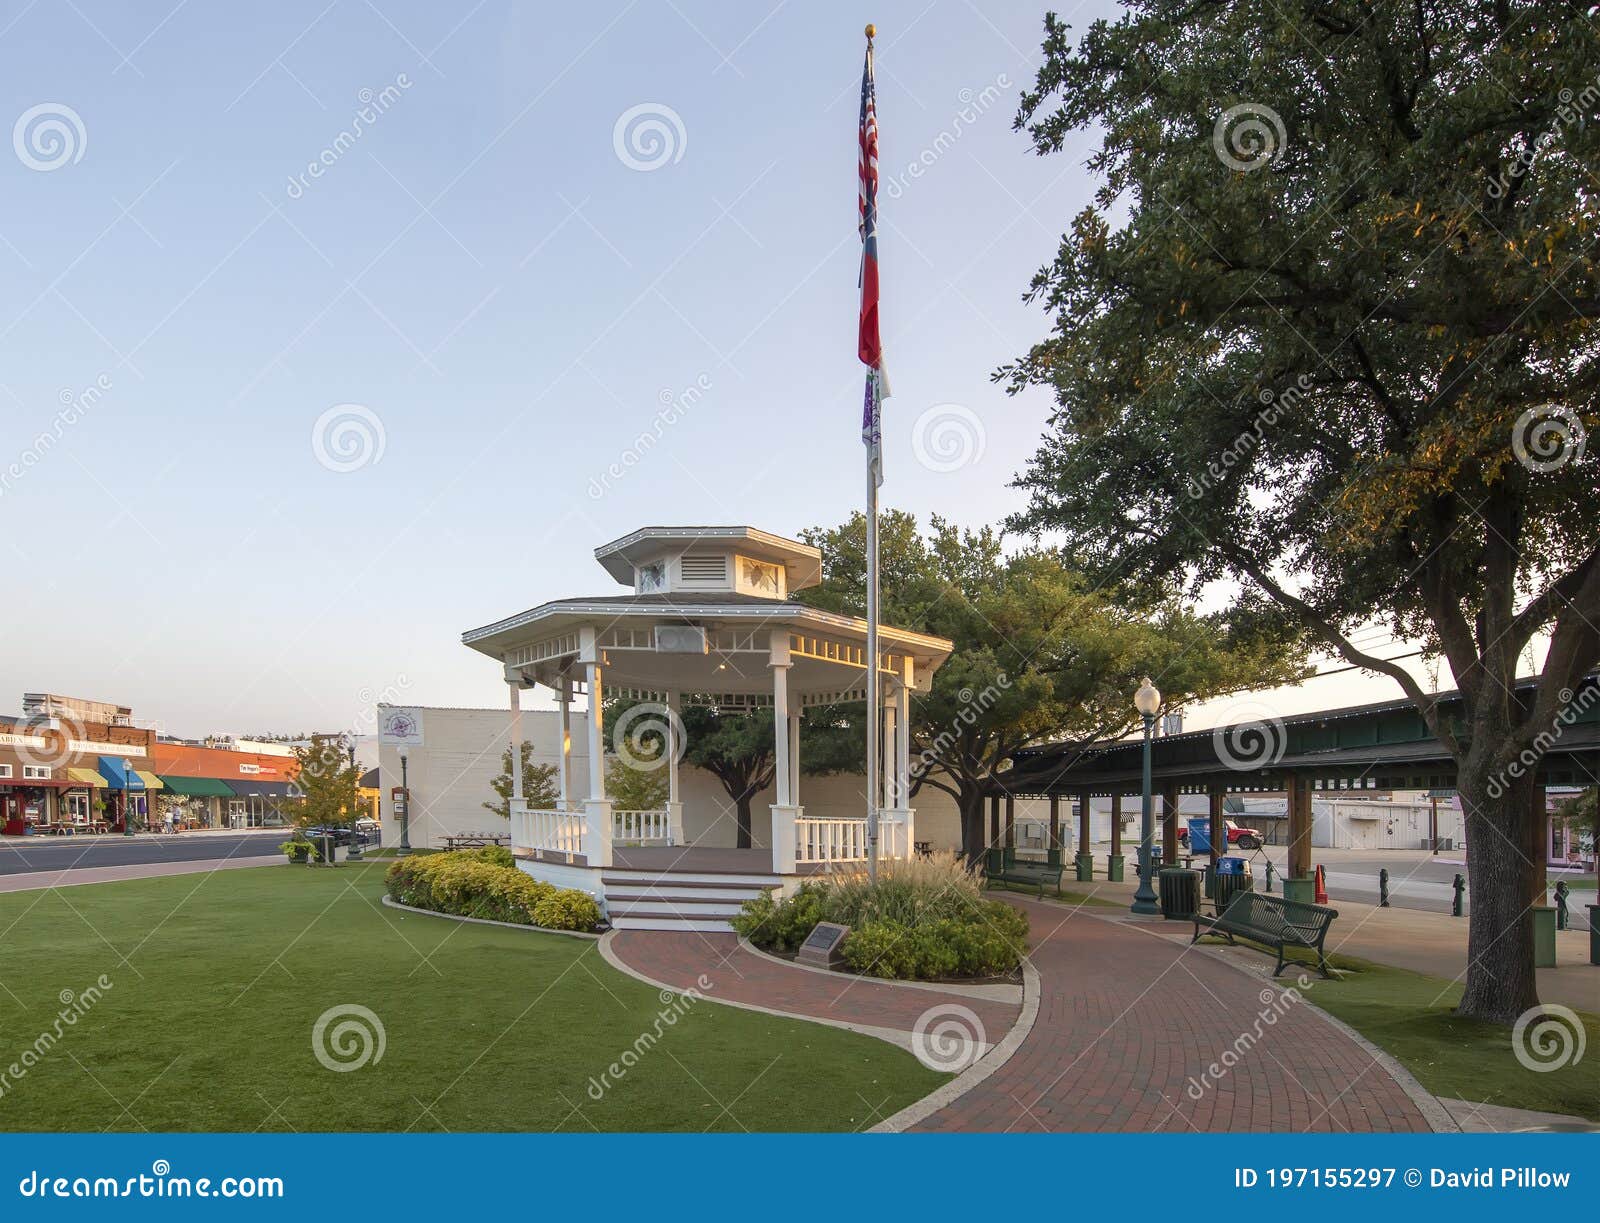 town square gazebo with flagpole in the historic district of grapevine, texas .